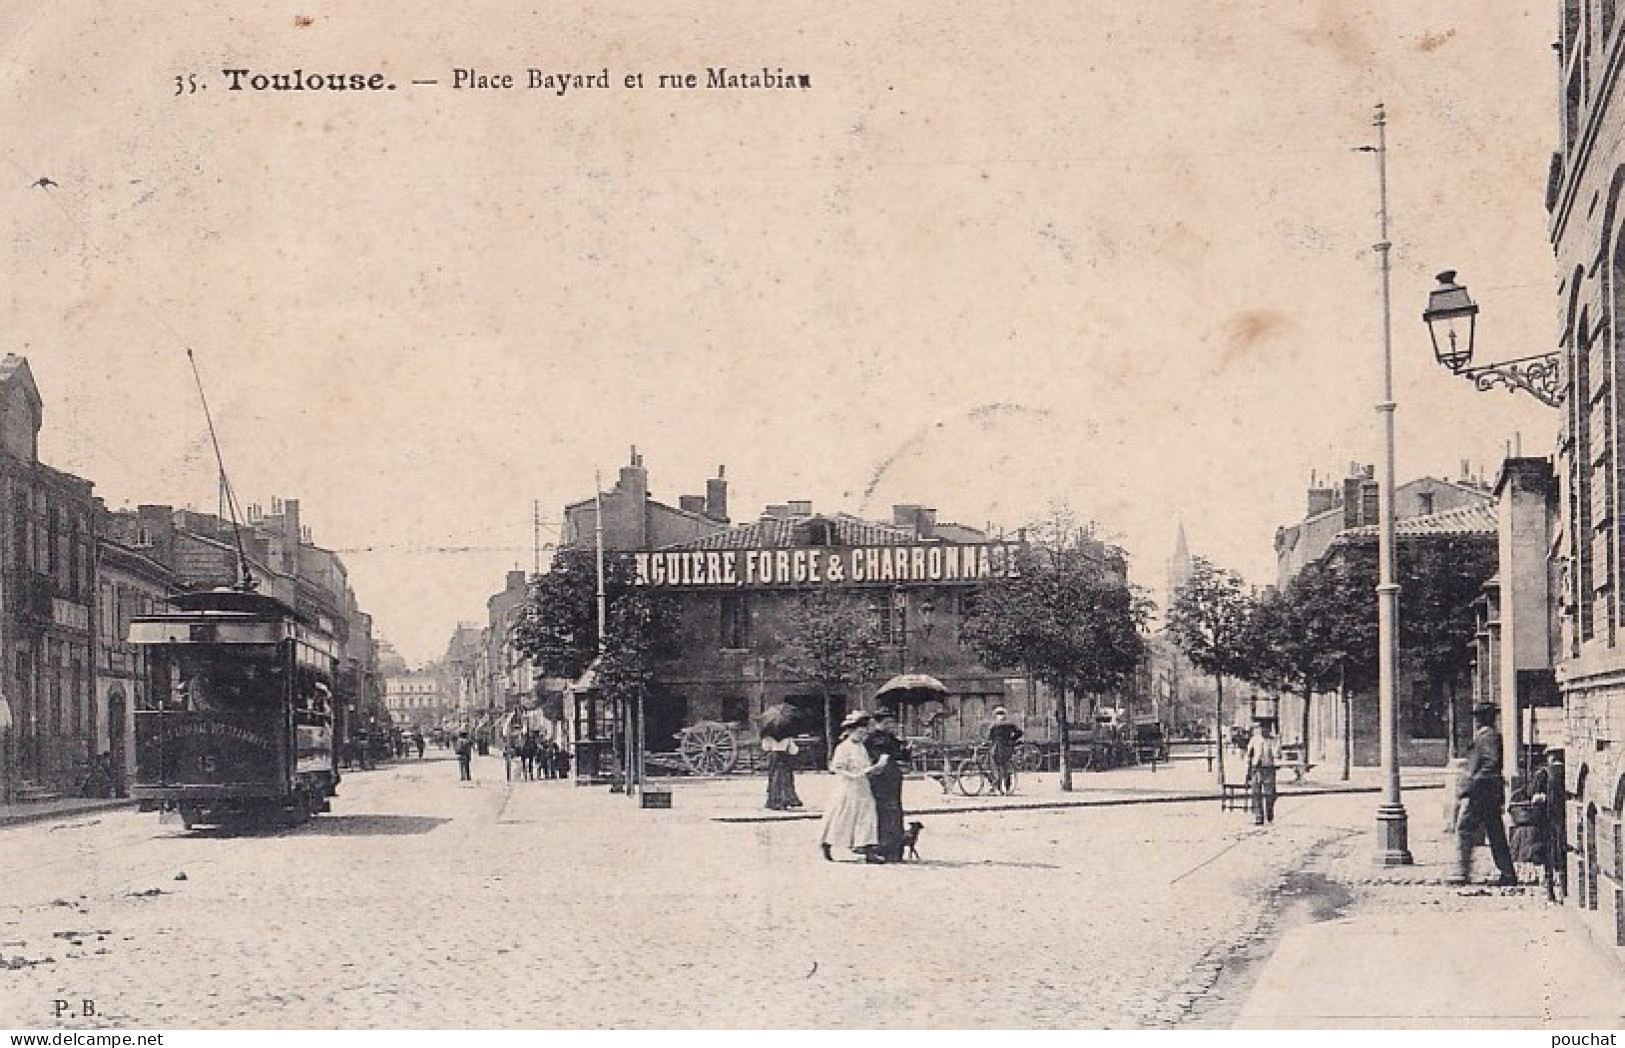 C8-31) TOULOUSE - PLACE BAYARD ET RUE MATABIAU  - TRAMWAY - FORGE  &  CHARONNAGE  - EN  1913 - ( 2 SCANS ) - Toulouse